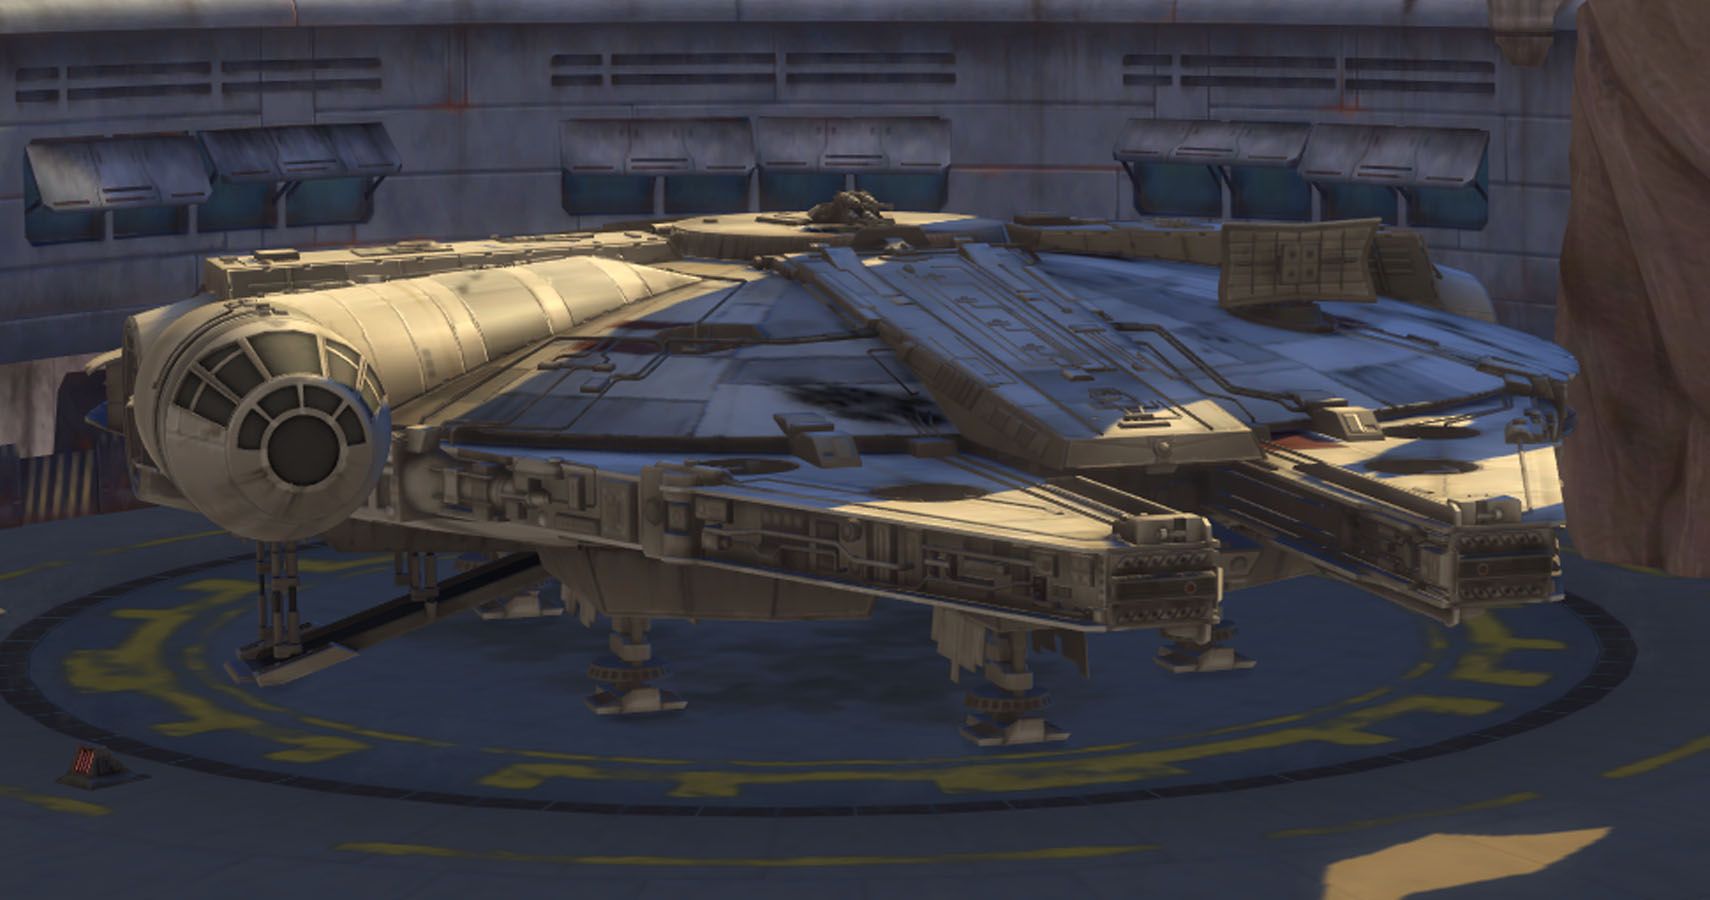 The Millenium Falcoln parked up in Batuu.